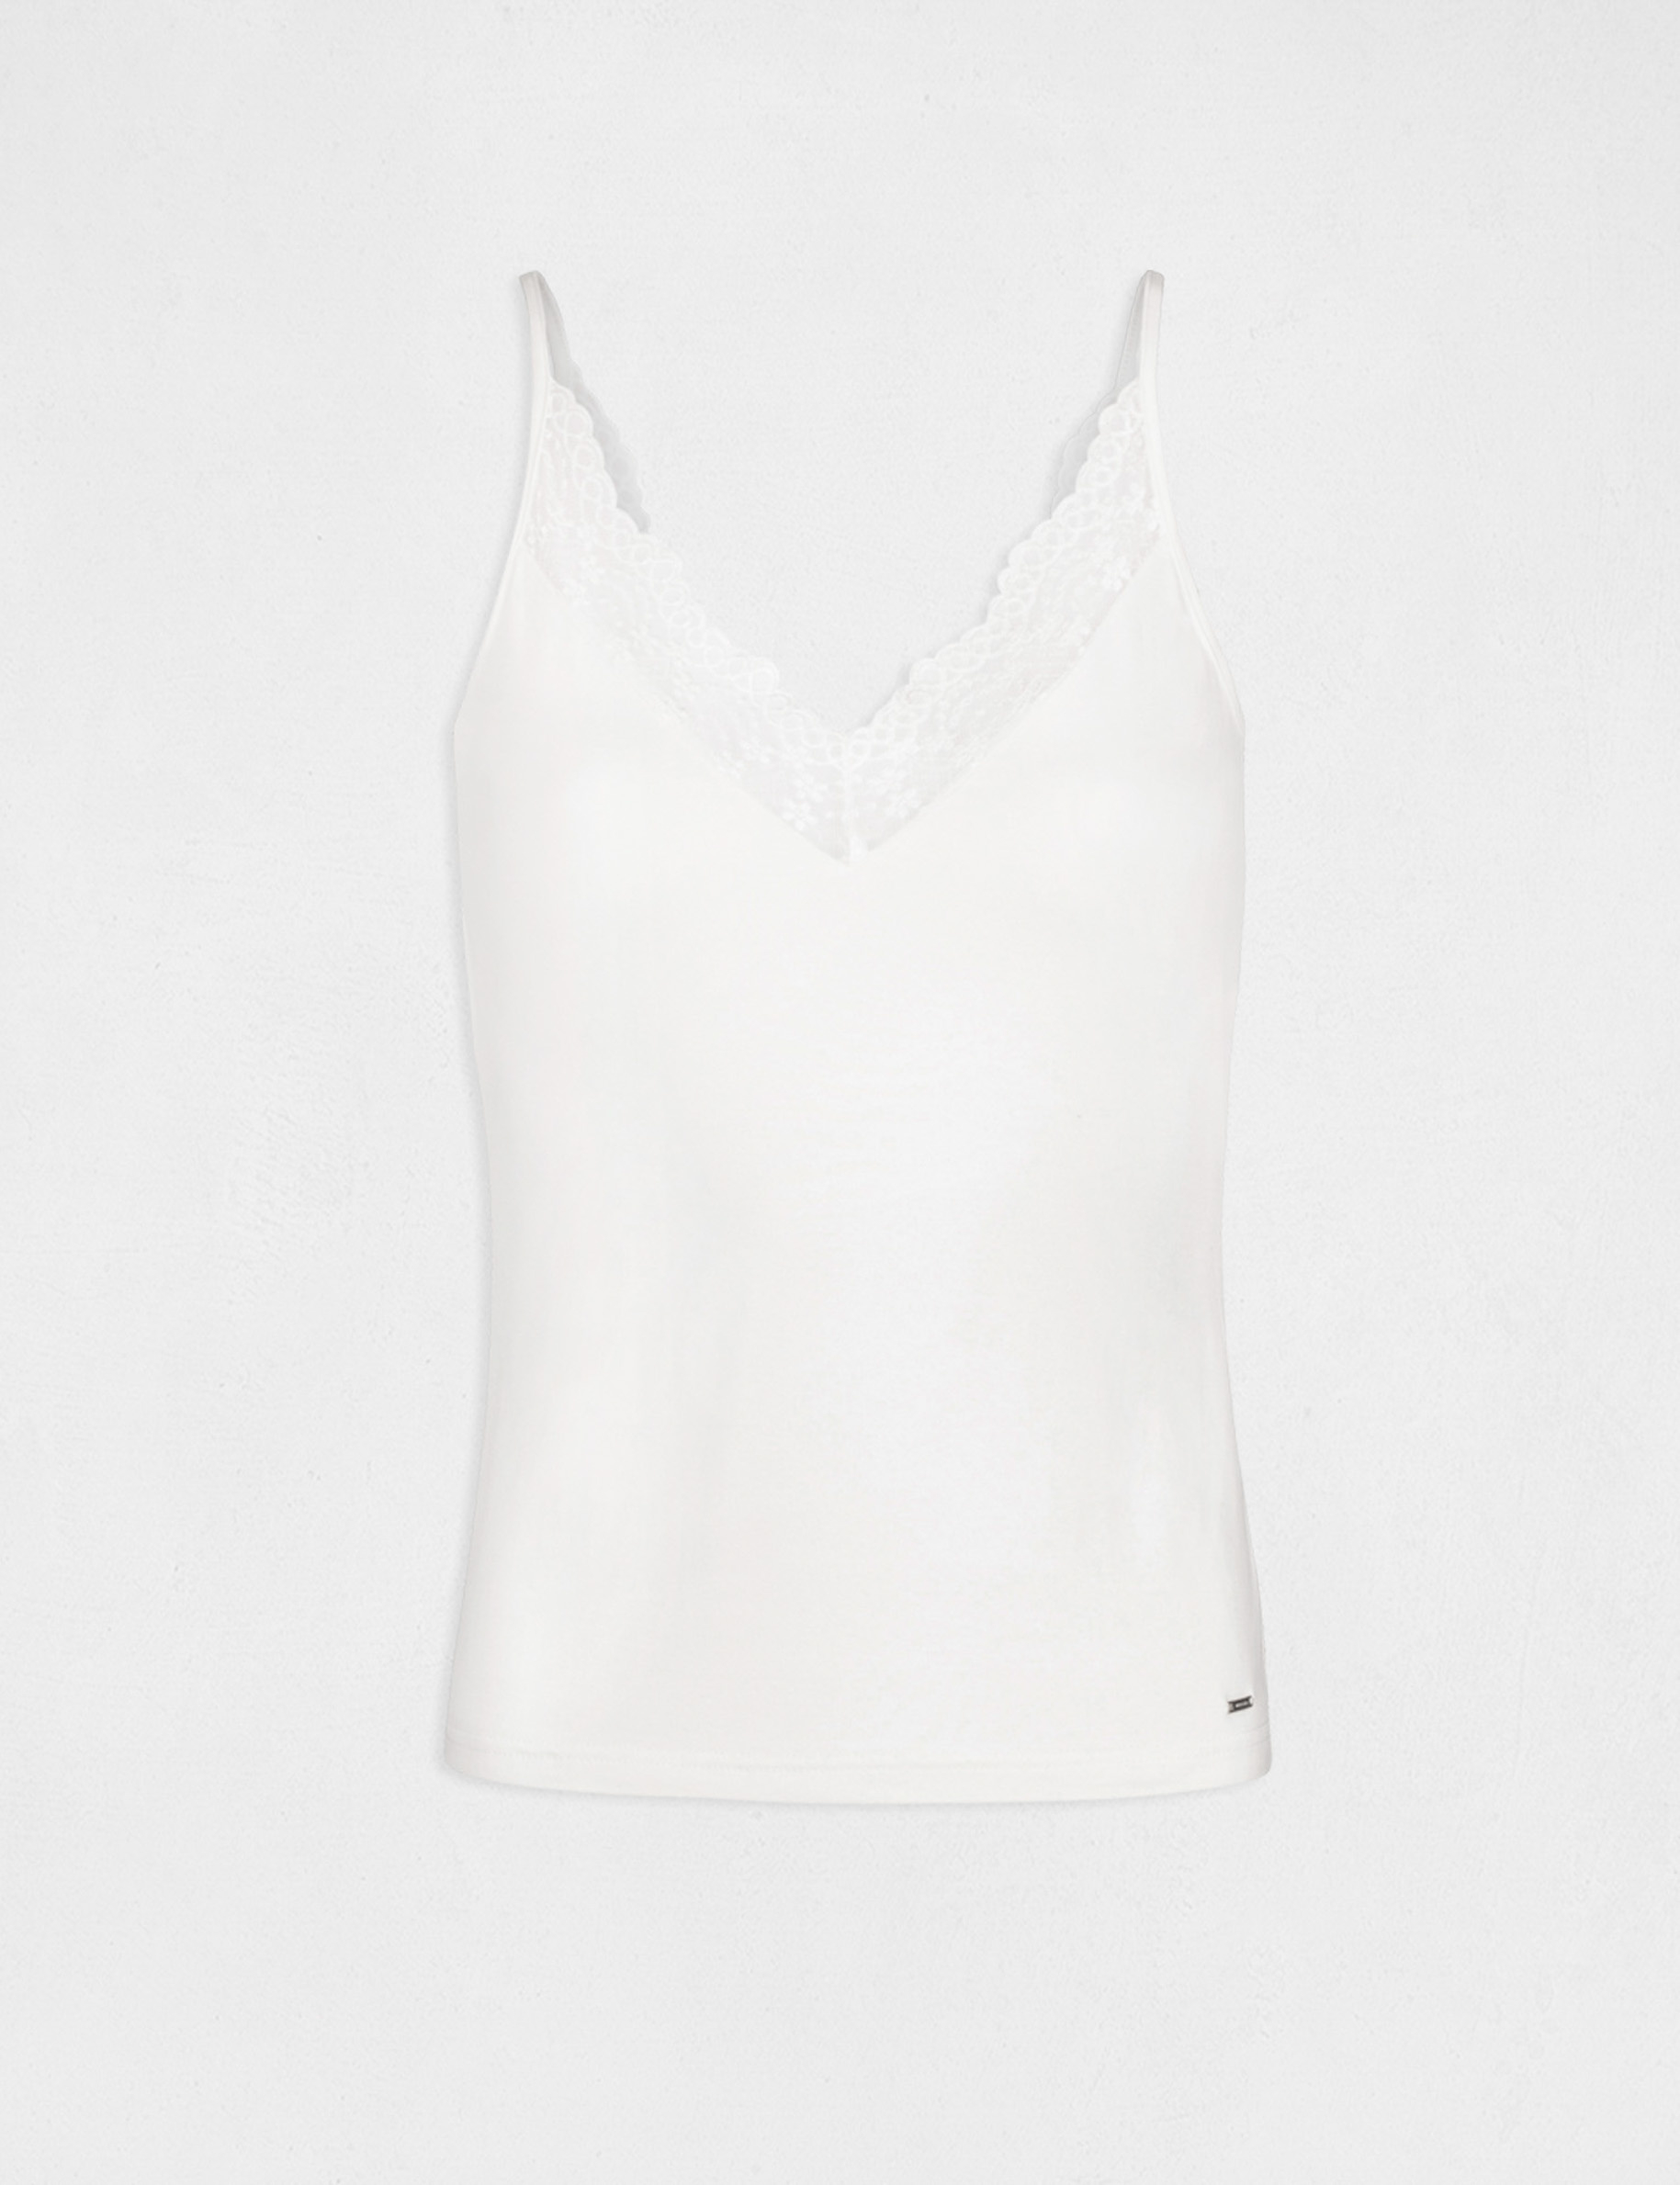 Vest top with thin straps and lace ecru ladies'